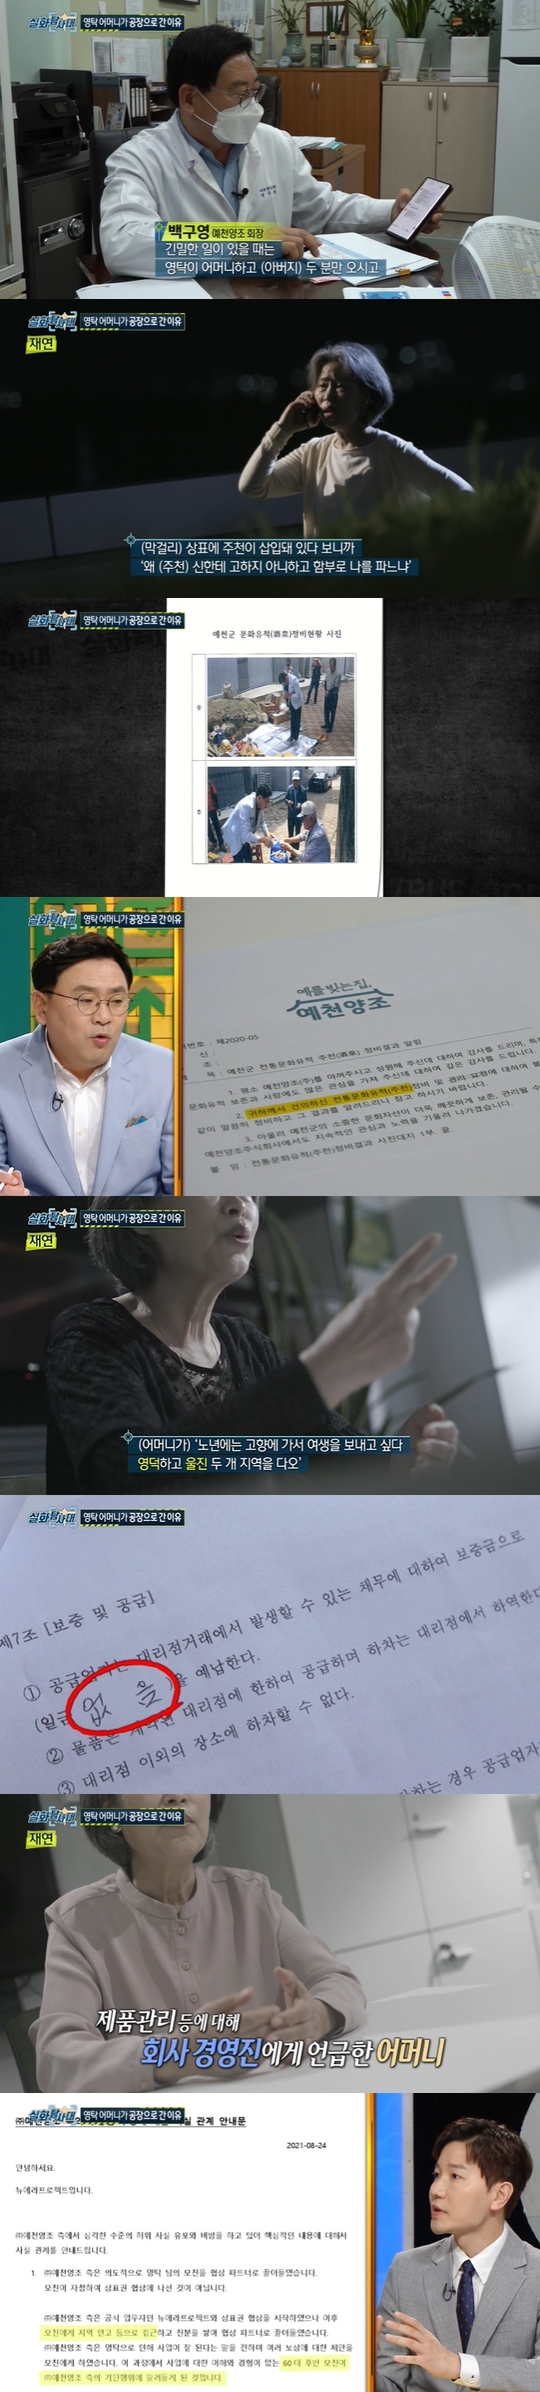 Yecheon Brewing claimed that he had received unreasonable demands from Mother of Young Tak.MBCs Realization Exploration Team, which aired on September 25, revealed an interview with Yecheon Brewing, who is in a legal dispute with Young Tak.Yecheon Brewing, who signed a one-year ad appearance contract with Young Tak for 160 million won, later claimed that Young Taks parents often visited the factory.There is a temple near Kim Ryong-sa, said Baek. Young Tak is said to be able to keep it if he gets hurt or prays since he was a child.Yecheon Brewing explained that Mother of Young Tak called Baek one day in an exasperated voice.My grandfather appeared in my dream and I was furious, Baek said. Why do you sell me without telling the god of Jucheon when the brand is inserted into the brand?President Baek said, Lets do the job in Jucheon.In July last year, Baek mobilized employees to organize the surroundings and stayed directly.The figure of the ritual was also written as a document to report to Young Tak Mother after the formal payment.Chairman Baek claimed that Mother of Young Tak made an unexpected request last summer. Mother is difficult to live.Samchully should have a means of punishment. I was uncomfortable with my brother (Young Tak father) and asked him what he could do, he said. If you come down two or three times a month and have a meeting with a fan, wouldnt you come to hundreds of fans?Thats a possibility, my sister-in-law, he said.Mother asked for Snow Crab and two areas of Uljin, I want to go home for the rest of my life in old age. Wheres the money? No deposit.You said you should take care of it.The two local Samchully contracts, Snow Crab and Uljin, which were released, had a deposit to be paid as no.If Young Tak Mother is coming, we will be on alert too, said Yecheon Brewing, managing director.Mother specifically asked me not to change the makgeolli by refrigerating it. Young Tak Mother did not respond to the interview, and the agency said that the production team first approached the mother through local connections and made friends with her mother, and then she fell into deceitful behavior in her late 60s, who had no understanding and experience in the business.